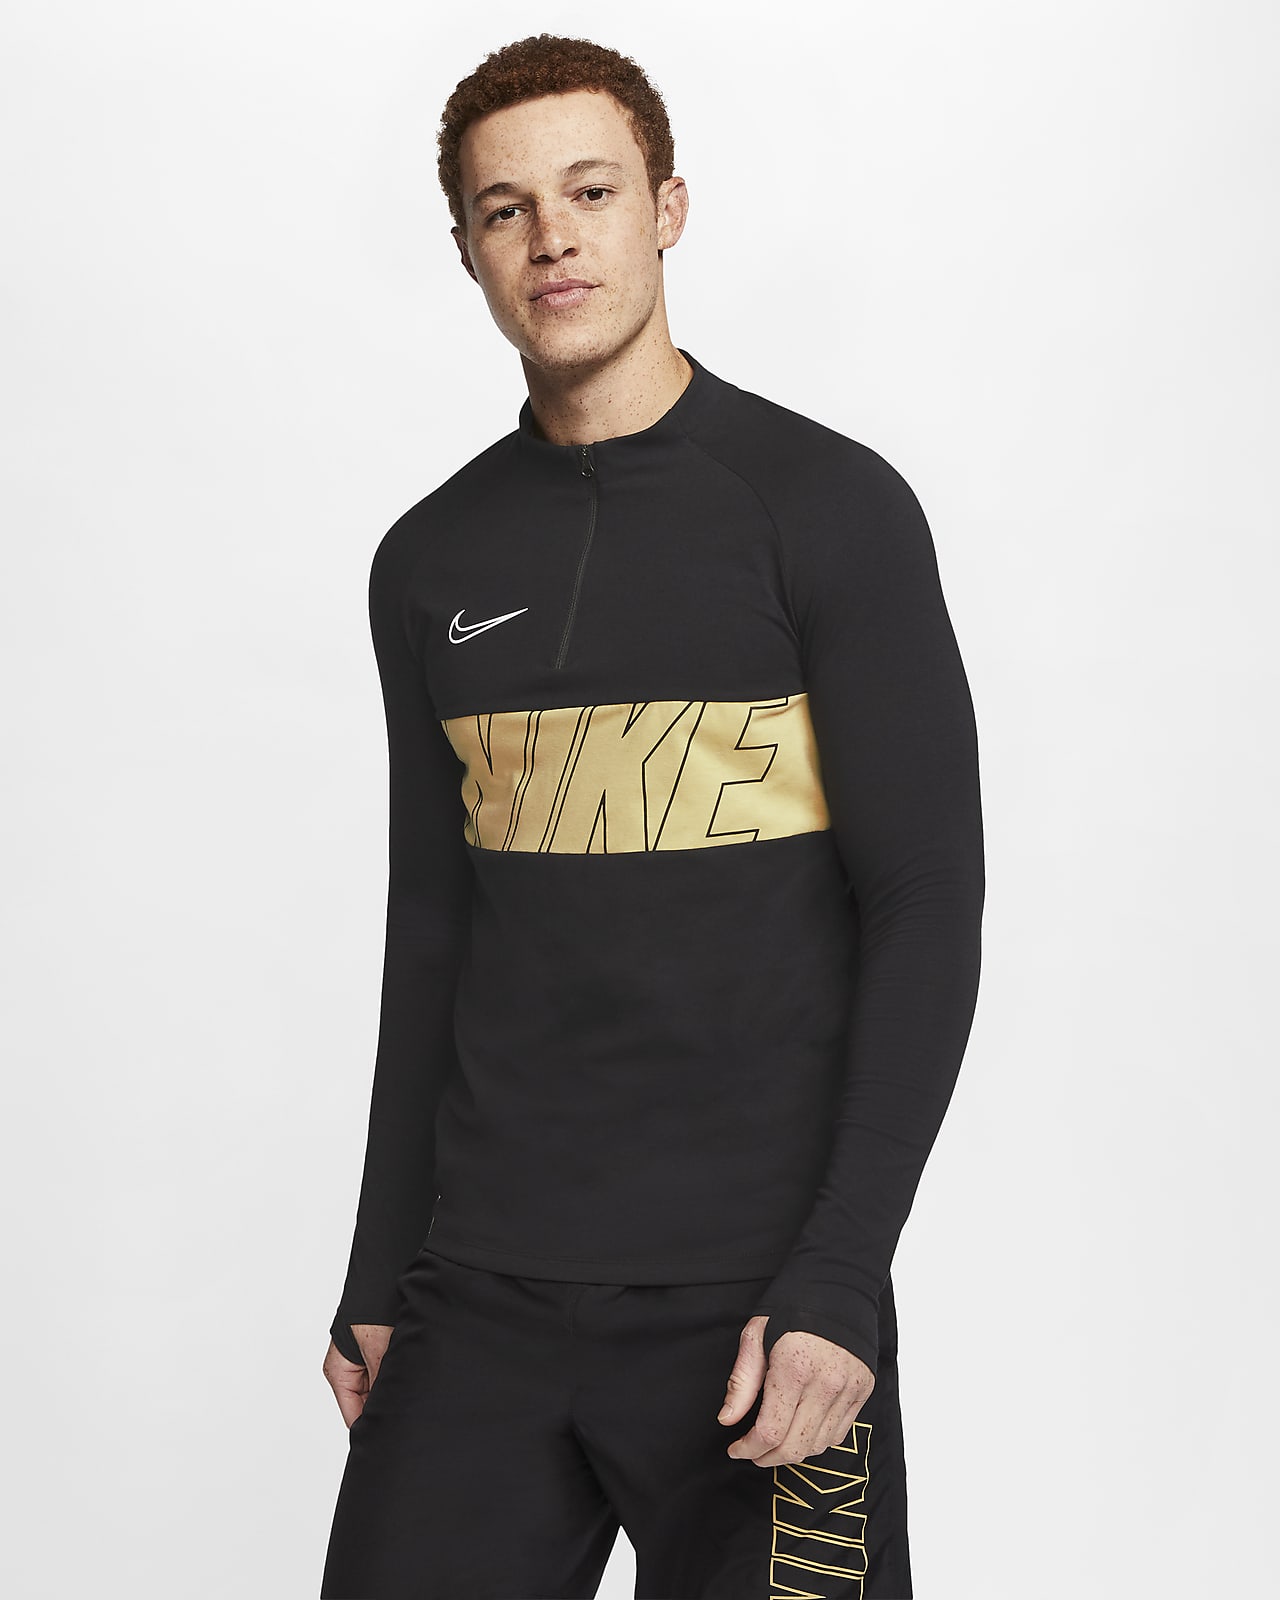 nike drill top academy